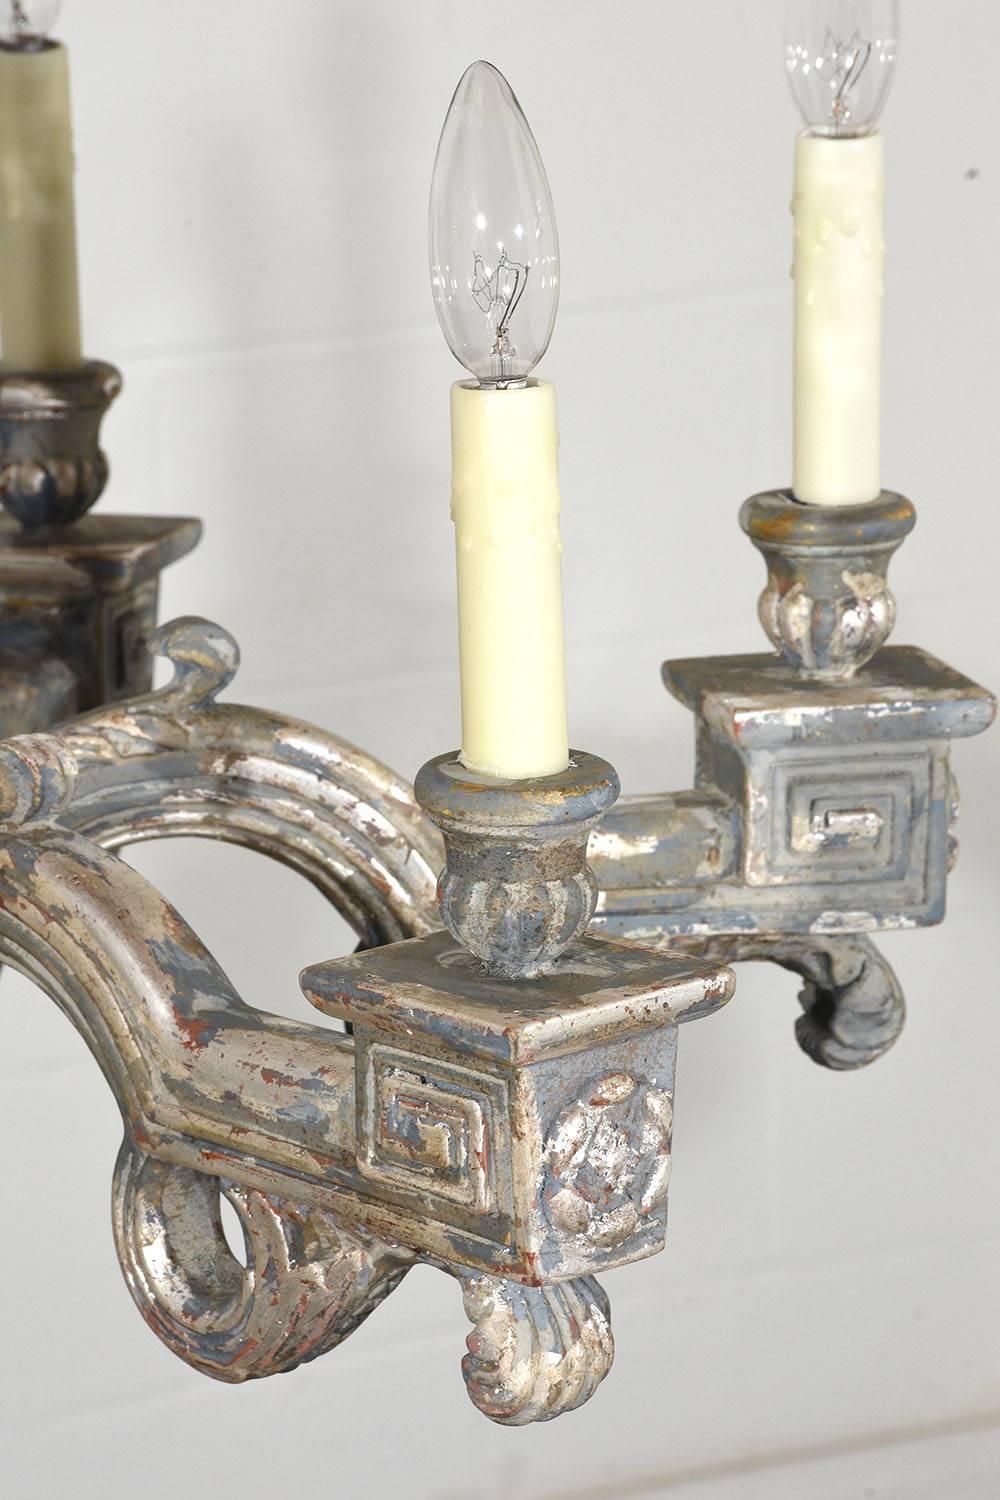 20th Century Pair of Six-Light Italian Neoclassical-Style Silver Leaf Carved Wood Chandeliers